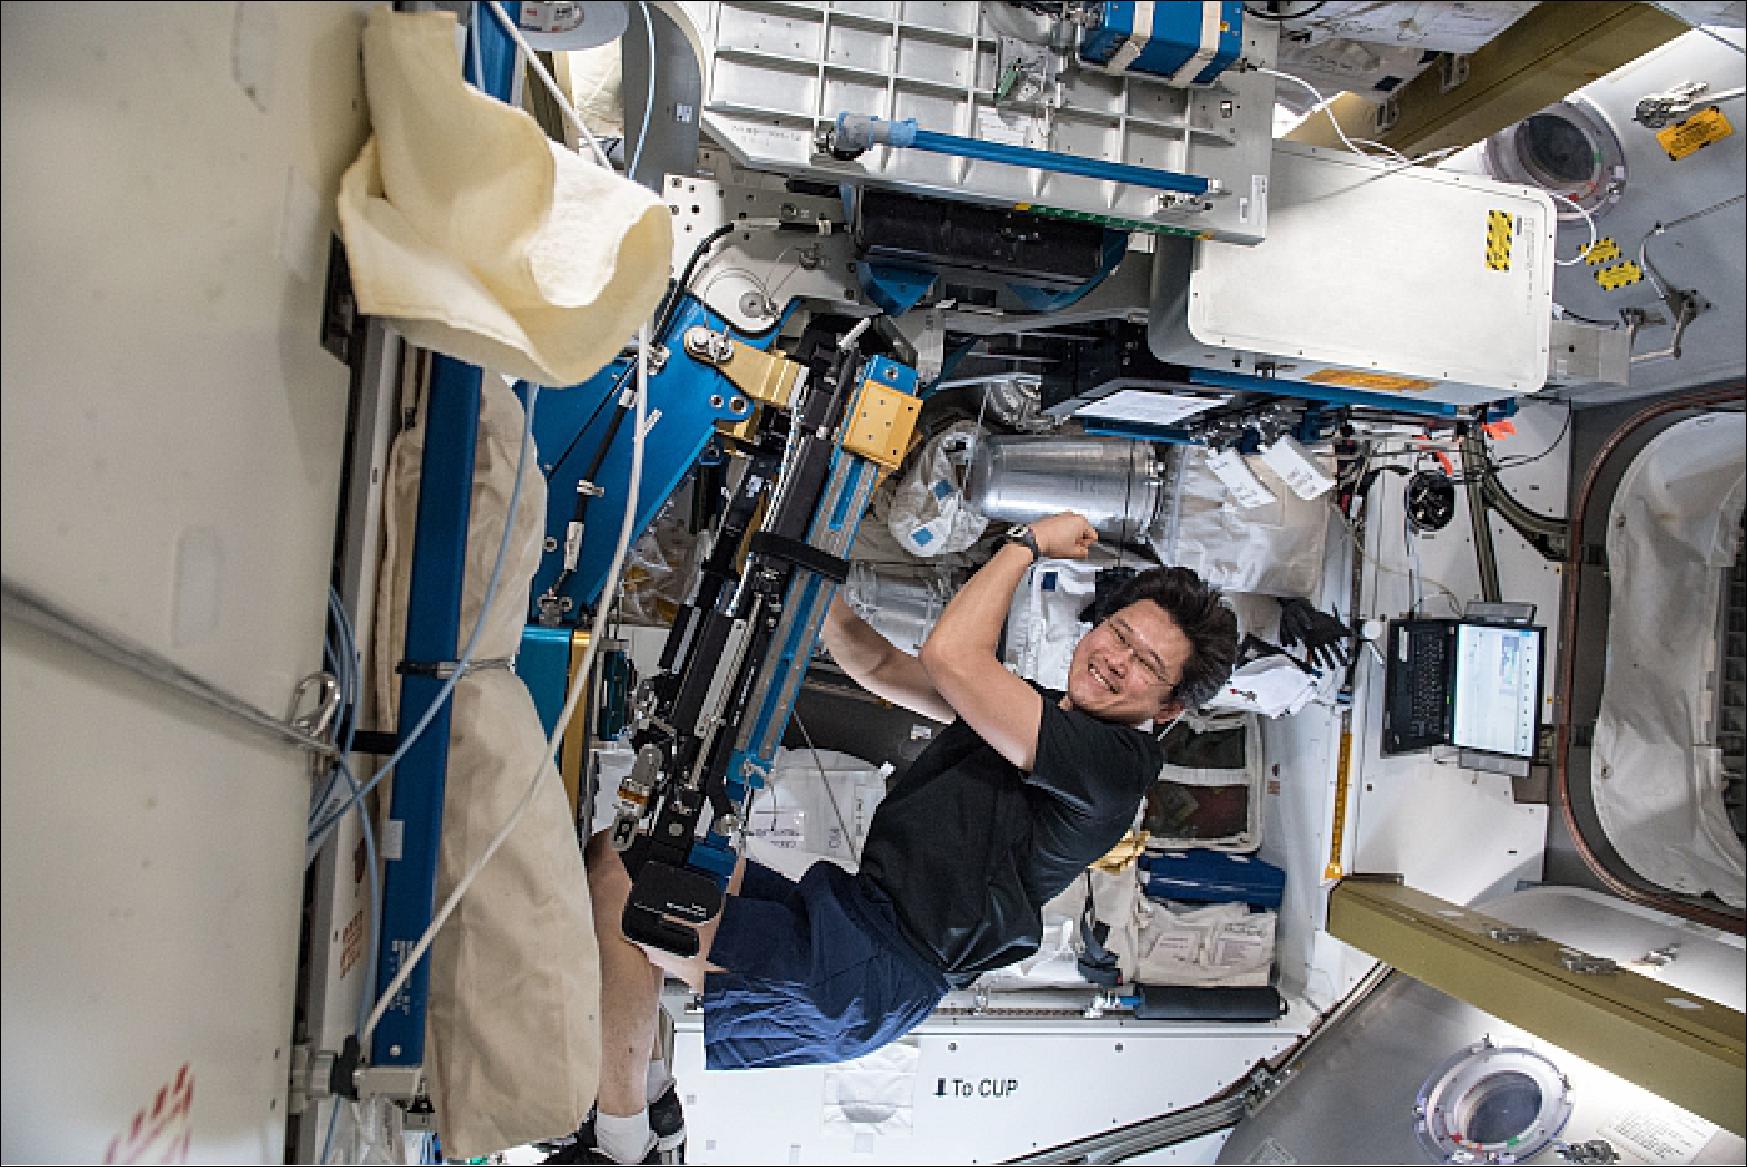 Figure 47: Japan Aerospace Exploration agency (JAXA) astronaut Norishige Kanai using the Advanced Resistive Exercise Device (ARED), which provides loading so that crew members experience load and maintain muscle strength and mass during long periods in space (image credit: JAXA)